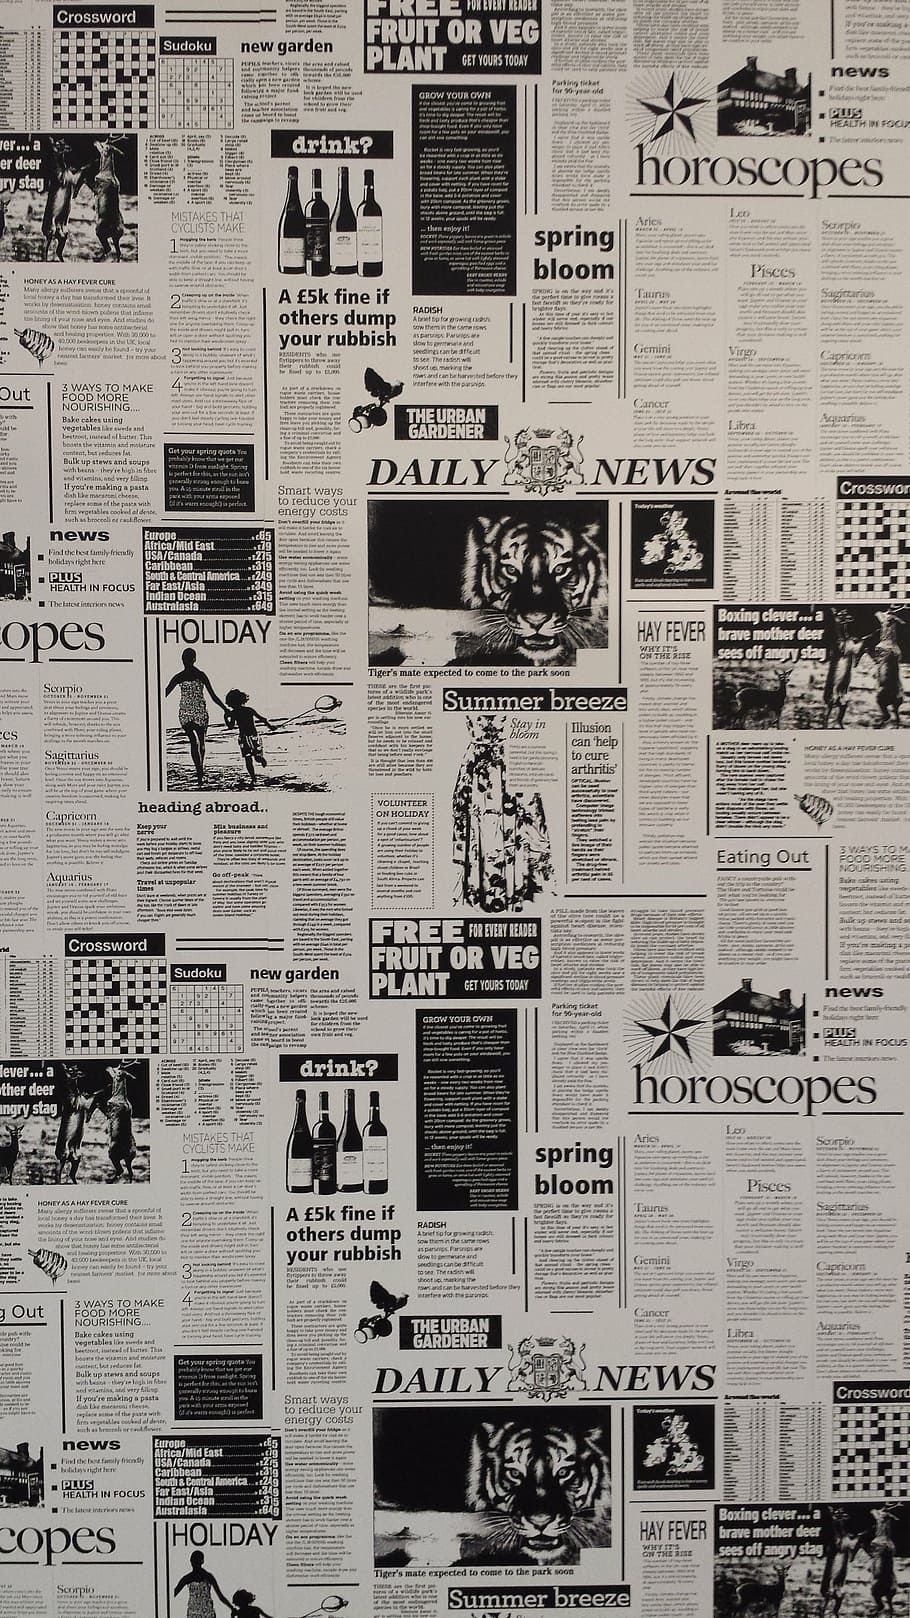 HD wallpaper Daily News newspaper black and white recording wallpapper